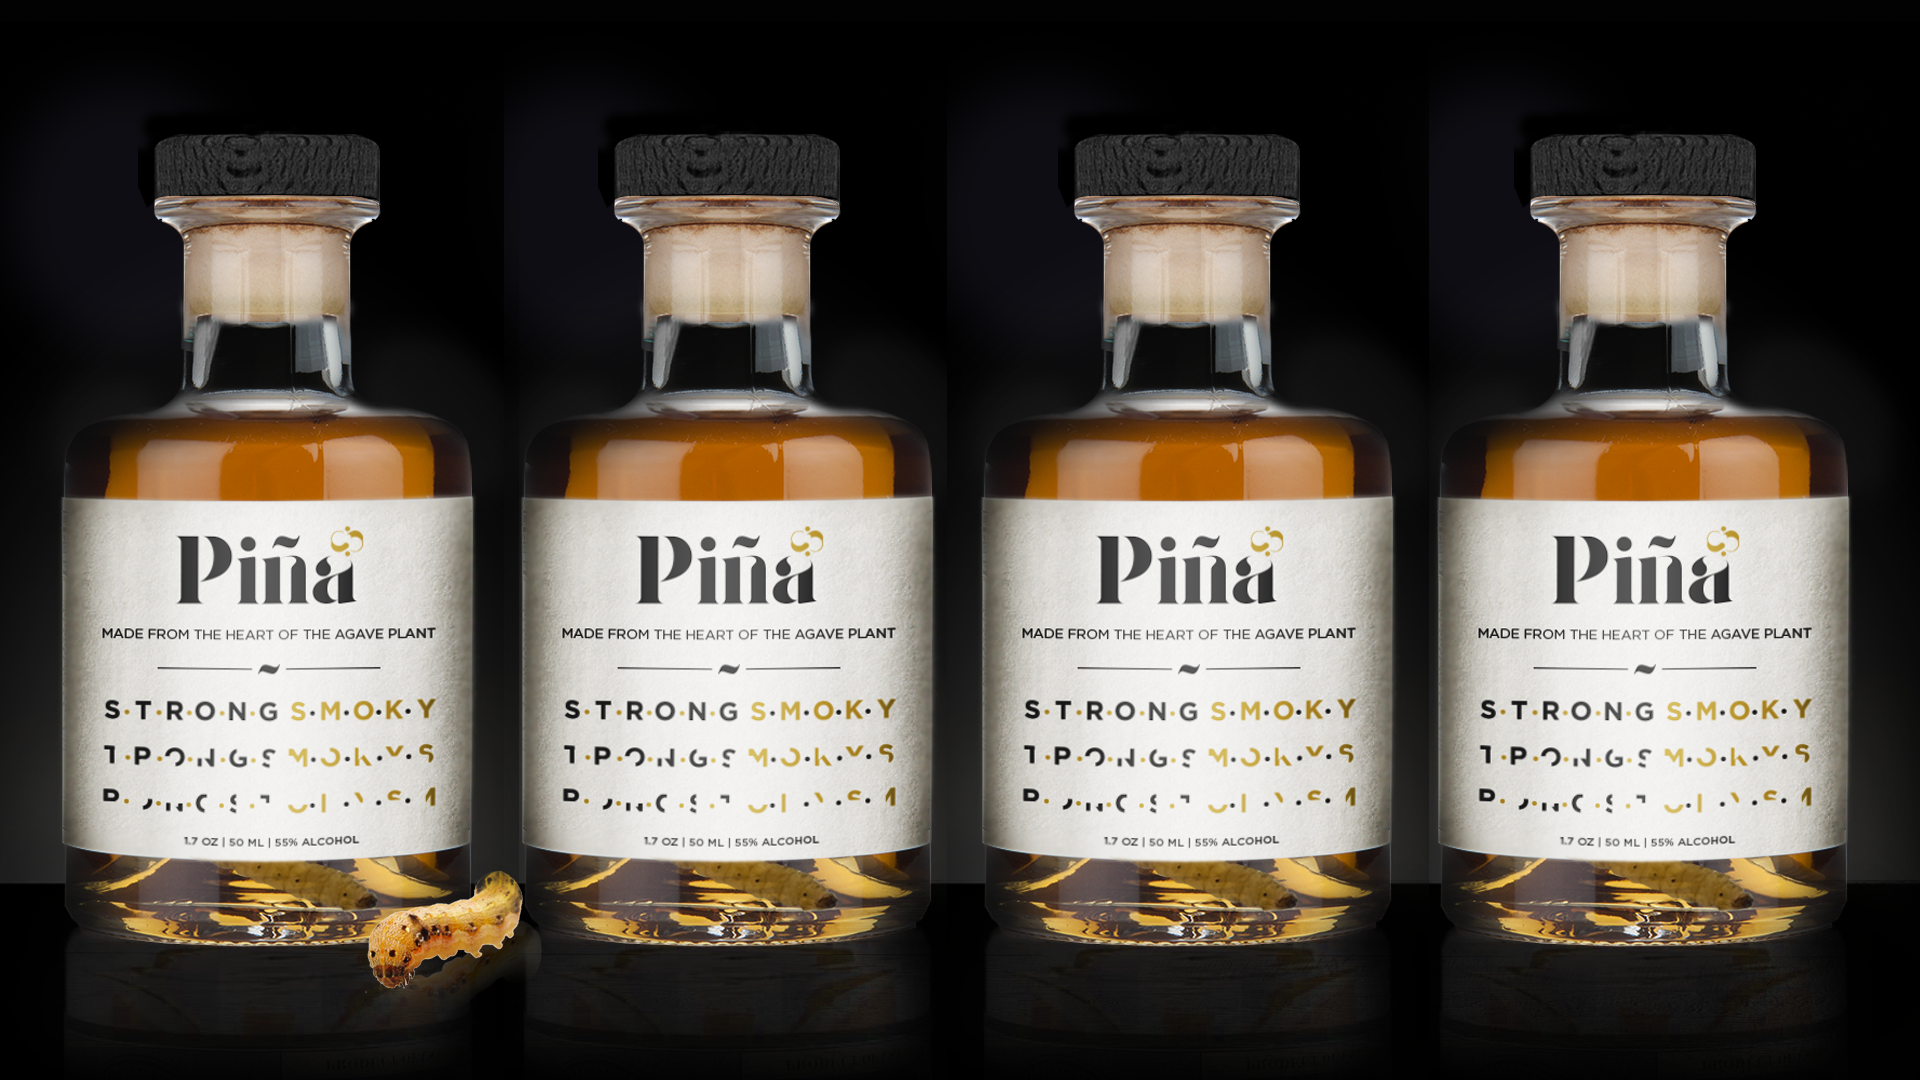 An Exclusive Mysterious Mezcal Brand that Promotes the Eating of Insects